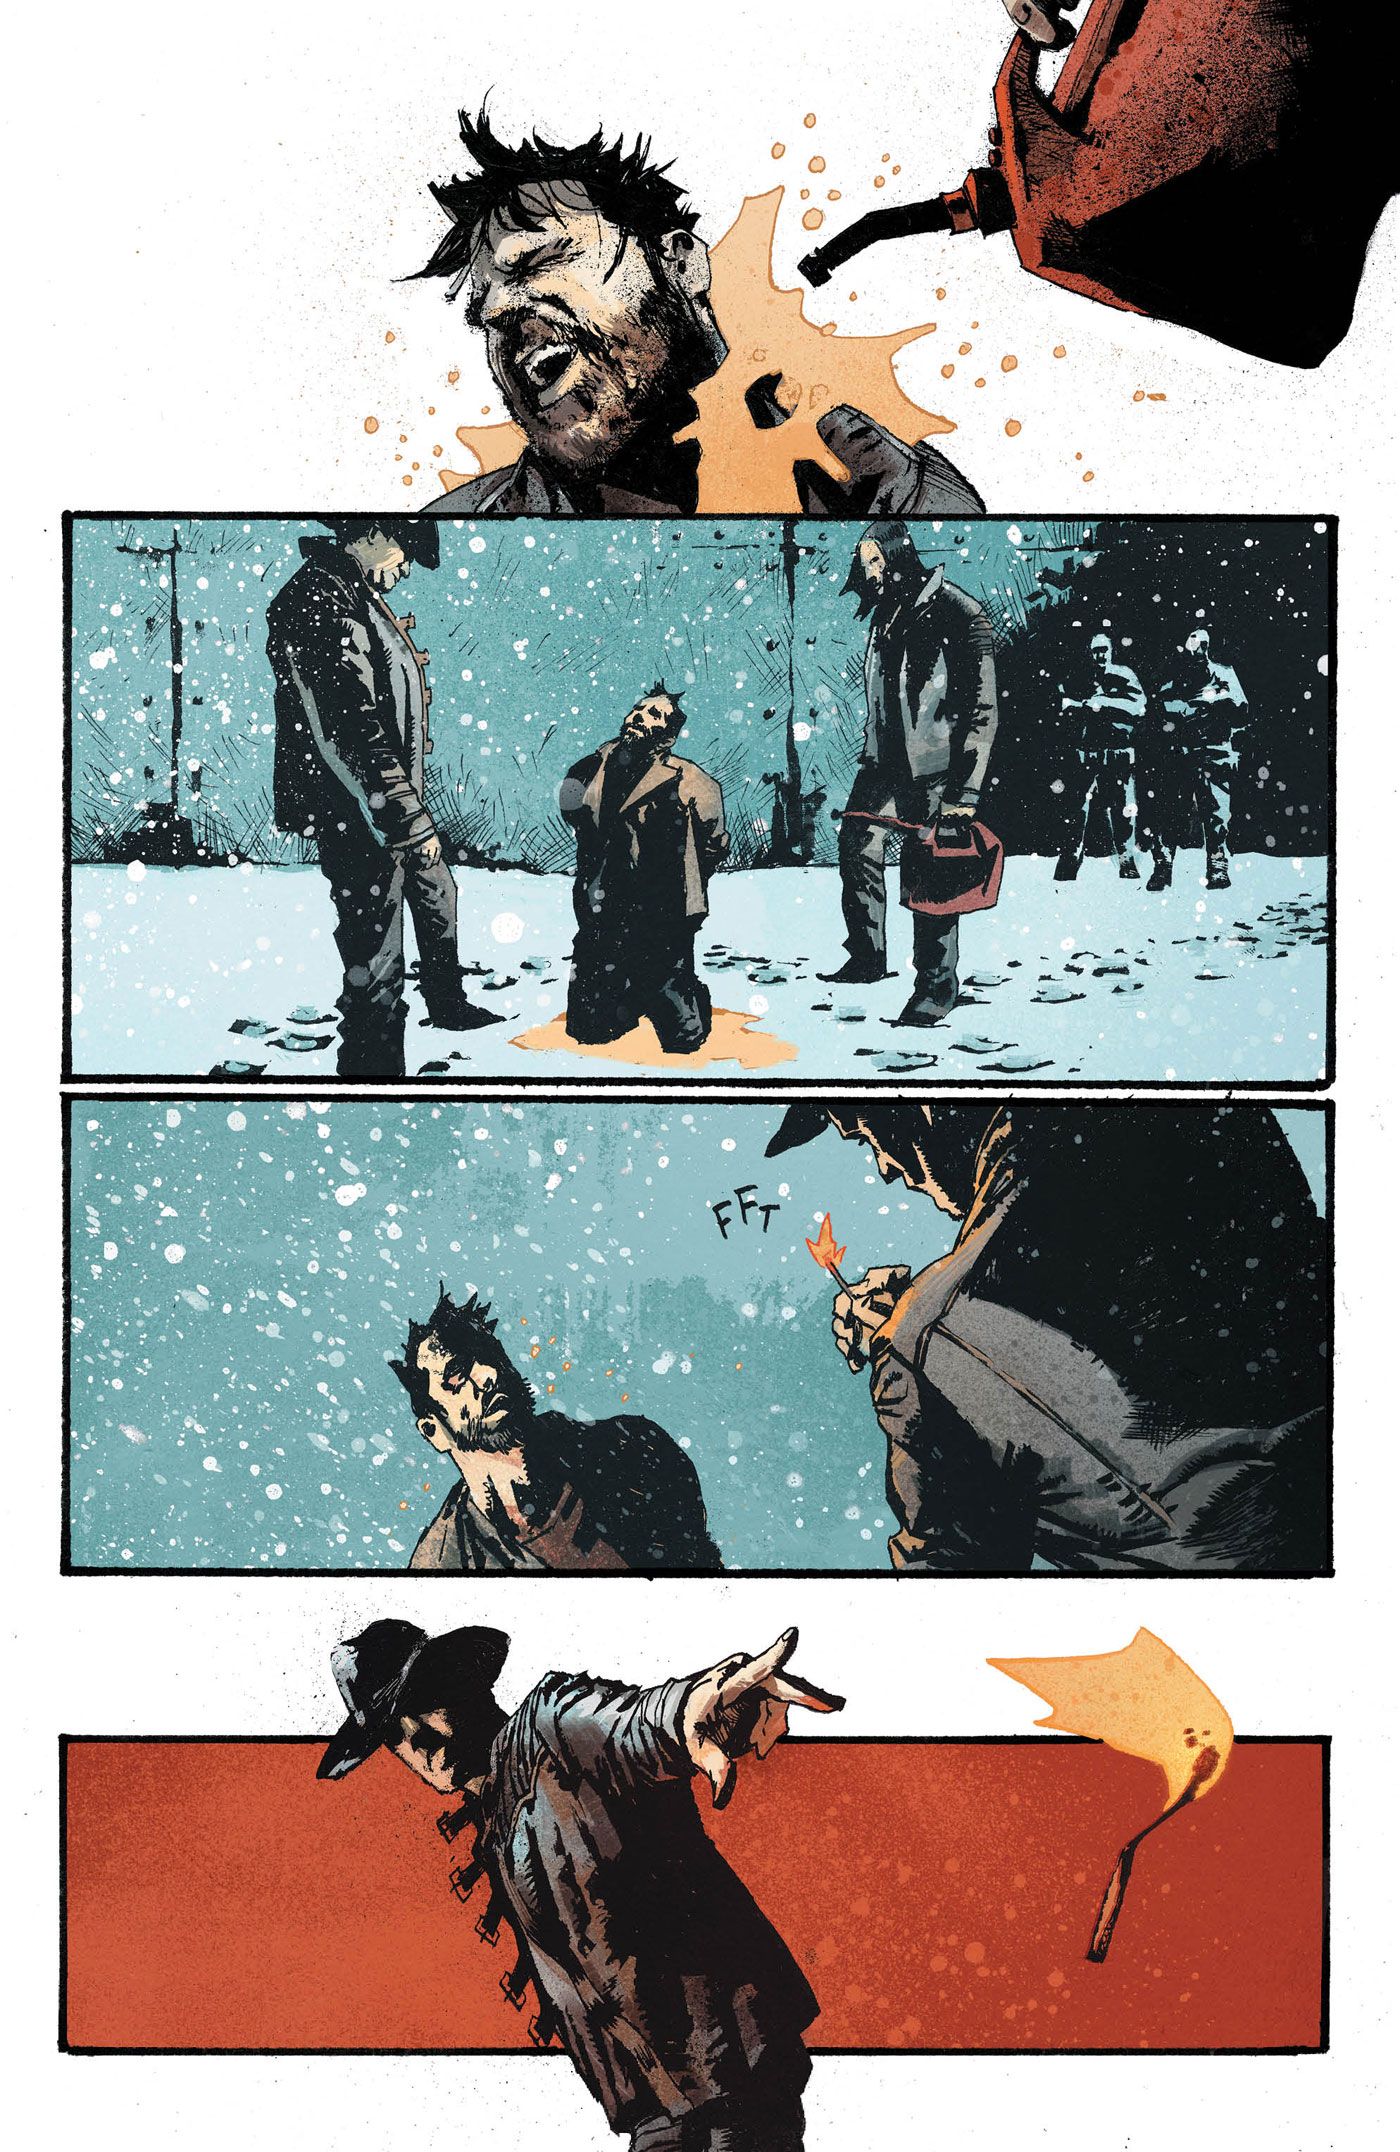 The first page from Frostbite #1